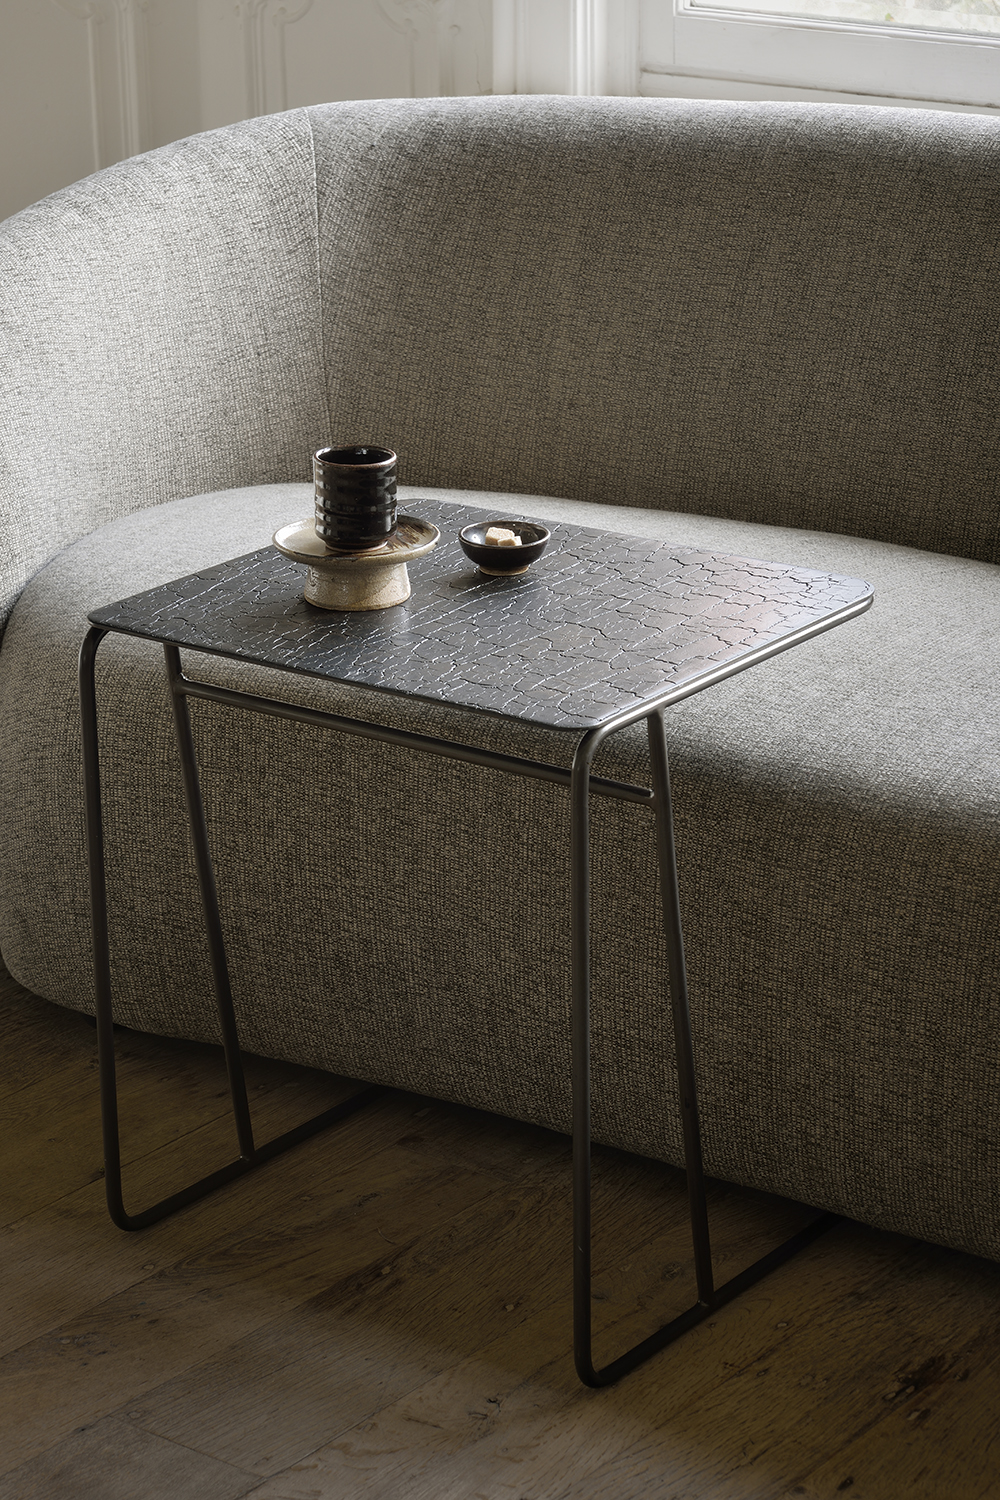 Ethnicrafts Ellipse side table is designed so the bottom can tuck partially under a sofa or bed to save on floor space